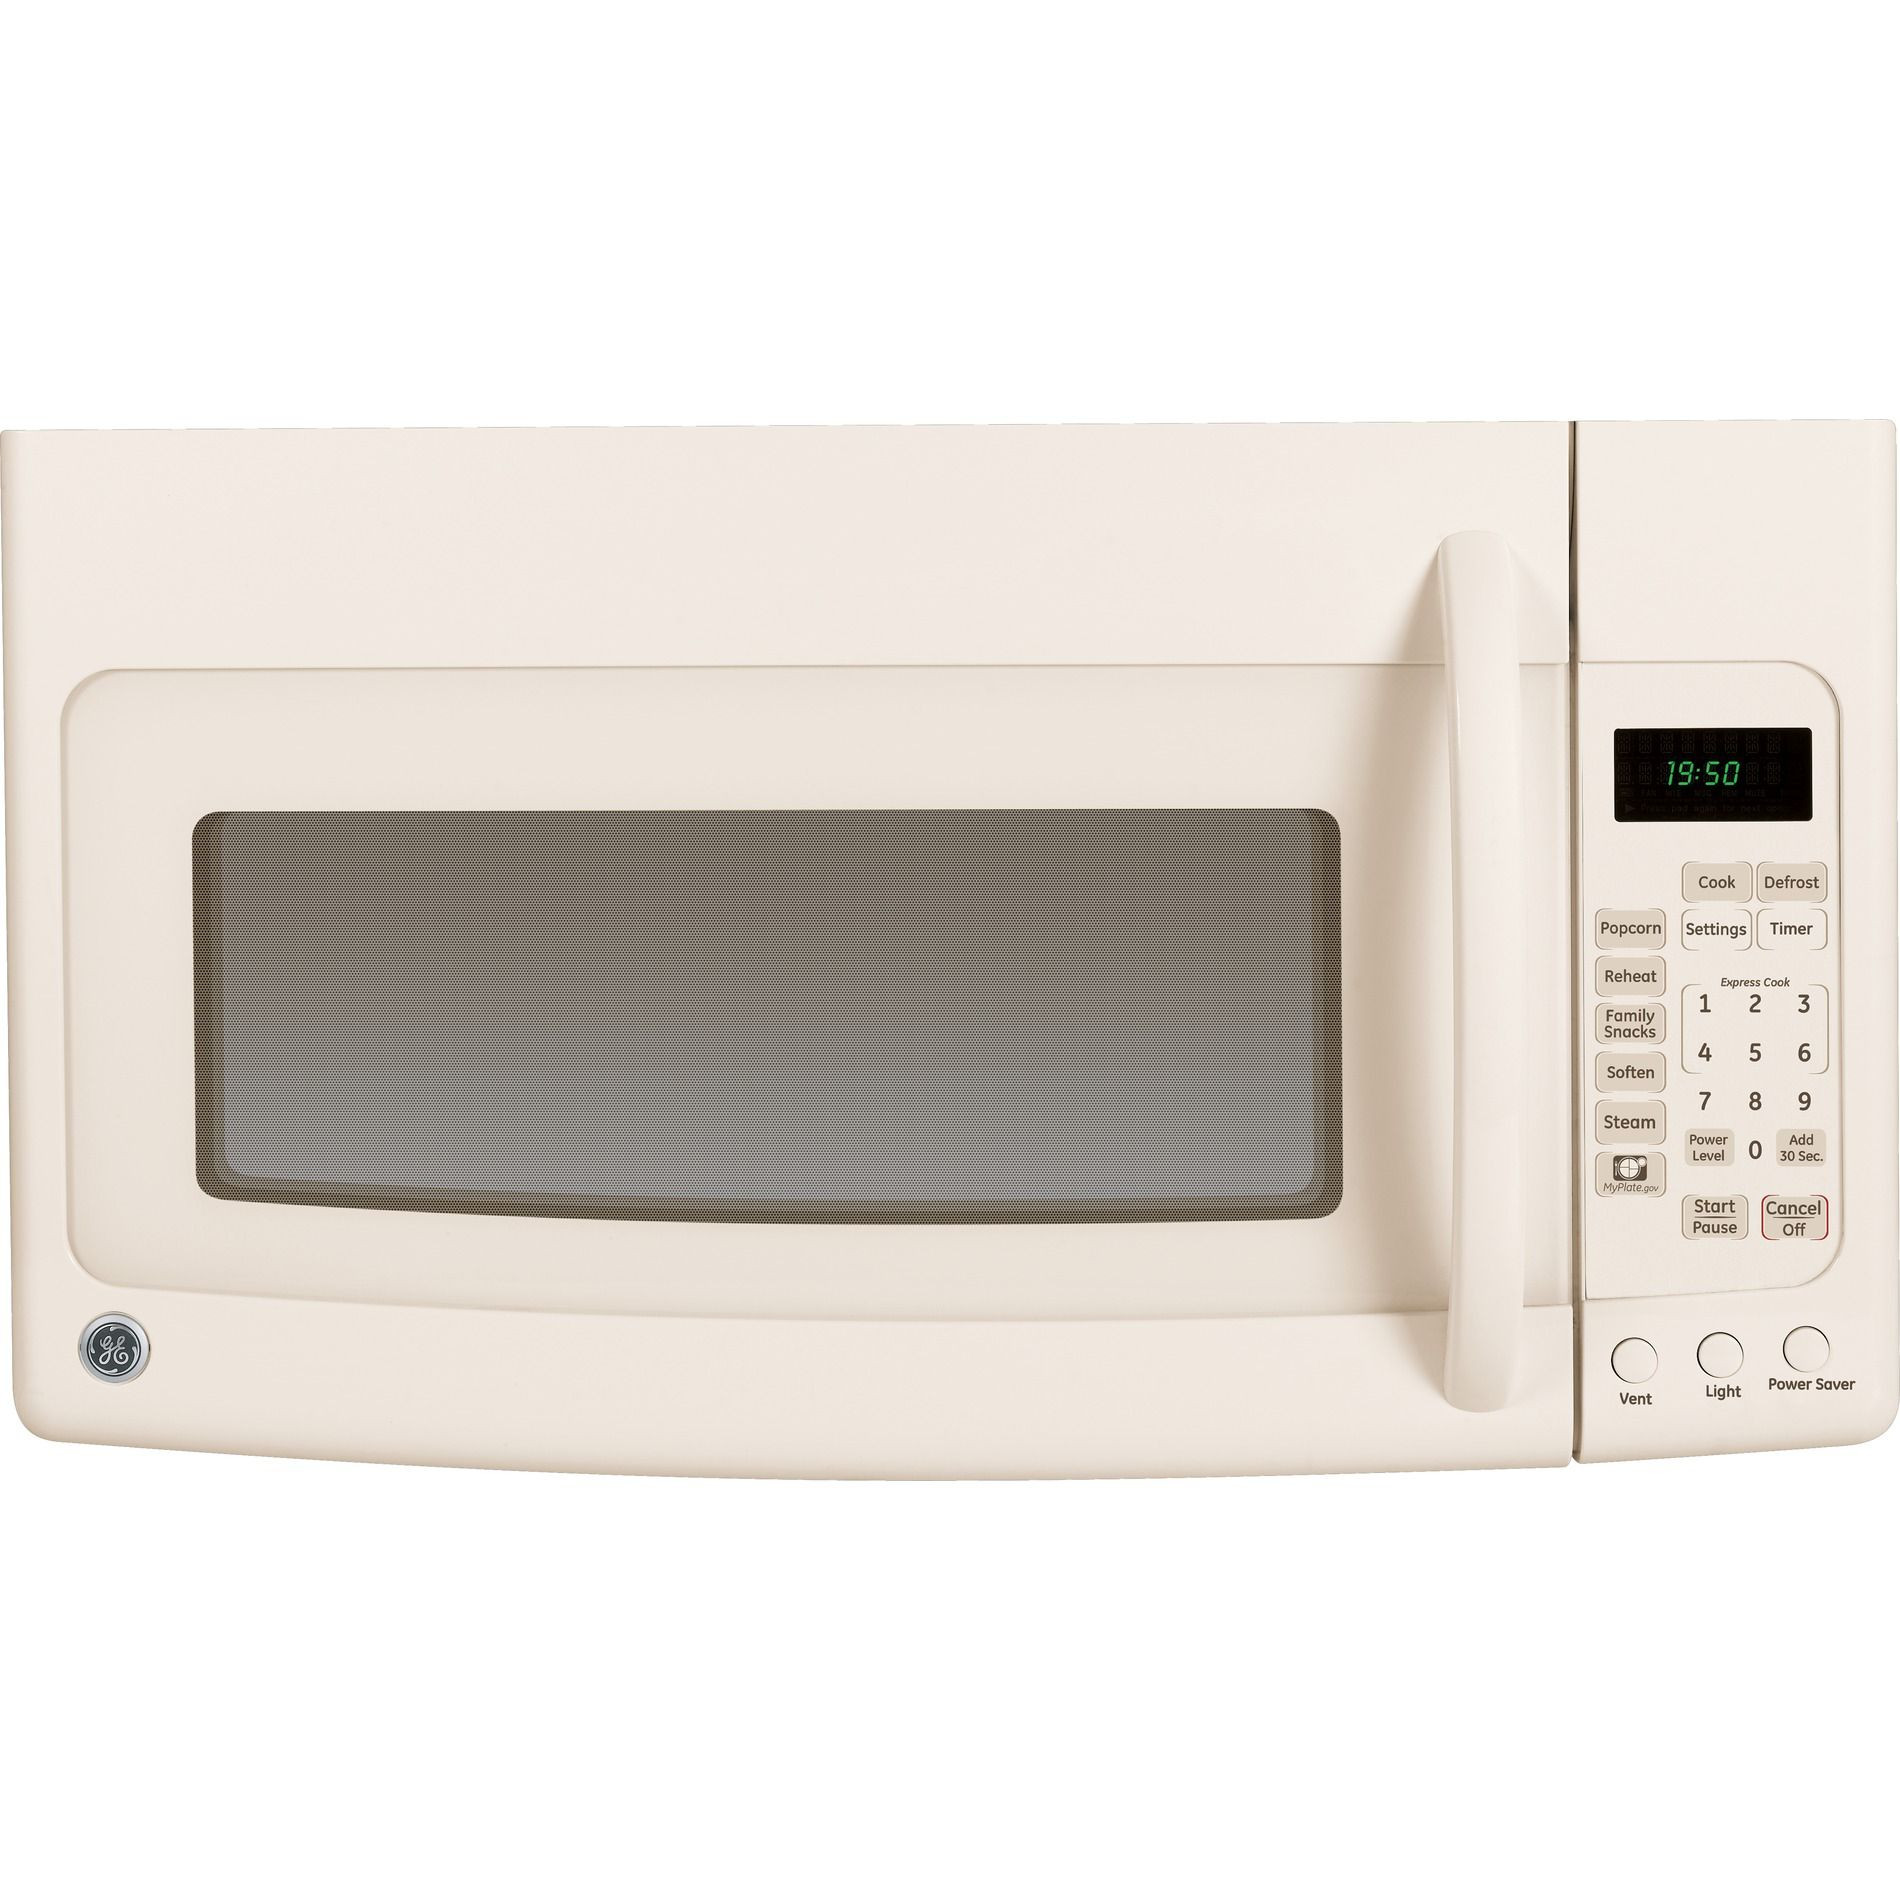 Over The Range Microwave Bisque
 Ge 1 9 Cu Ft Over the range Sensor Microwave Oven